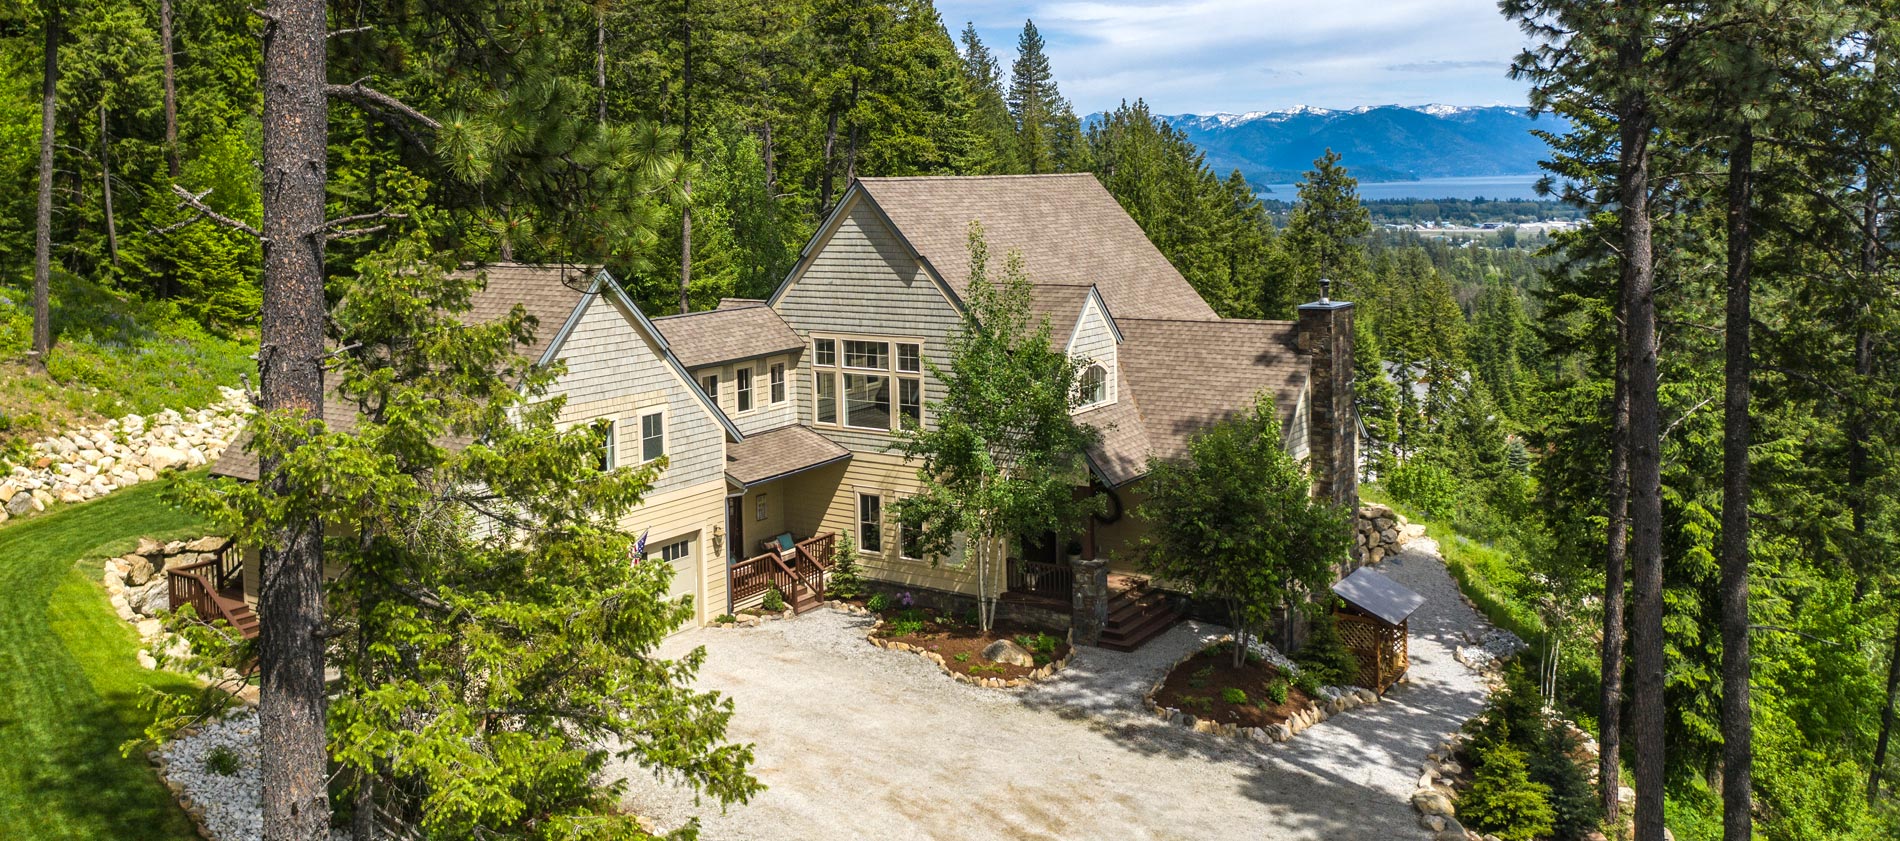 Sandpoint Lake View Home on 7.9 acres for sale Konniotto Lane